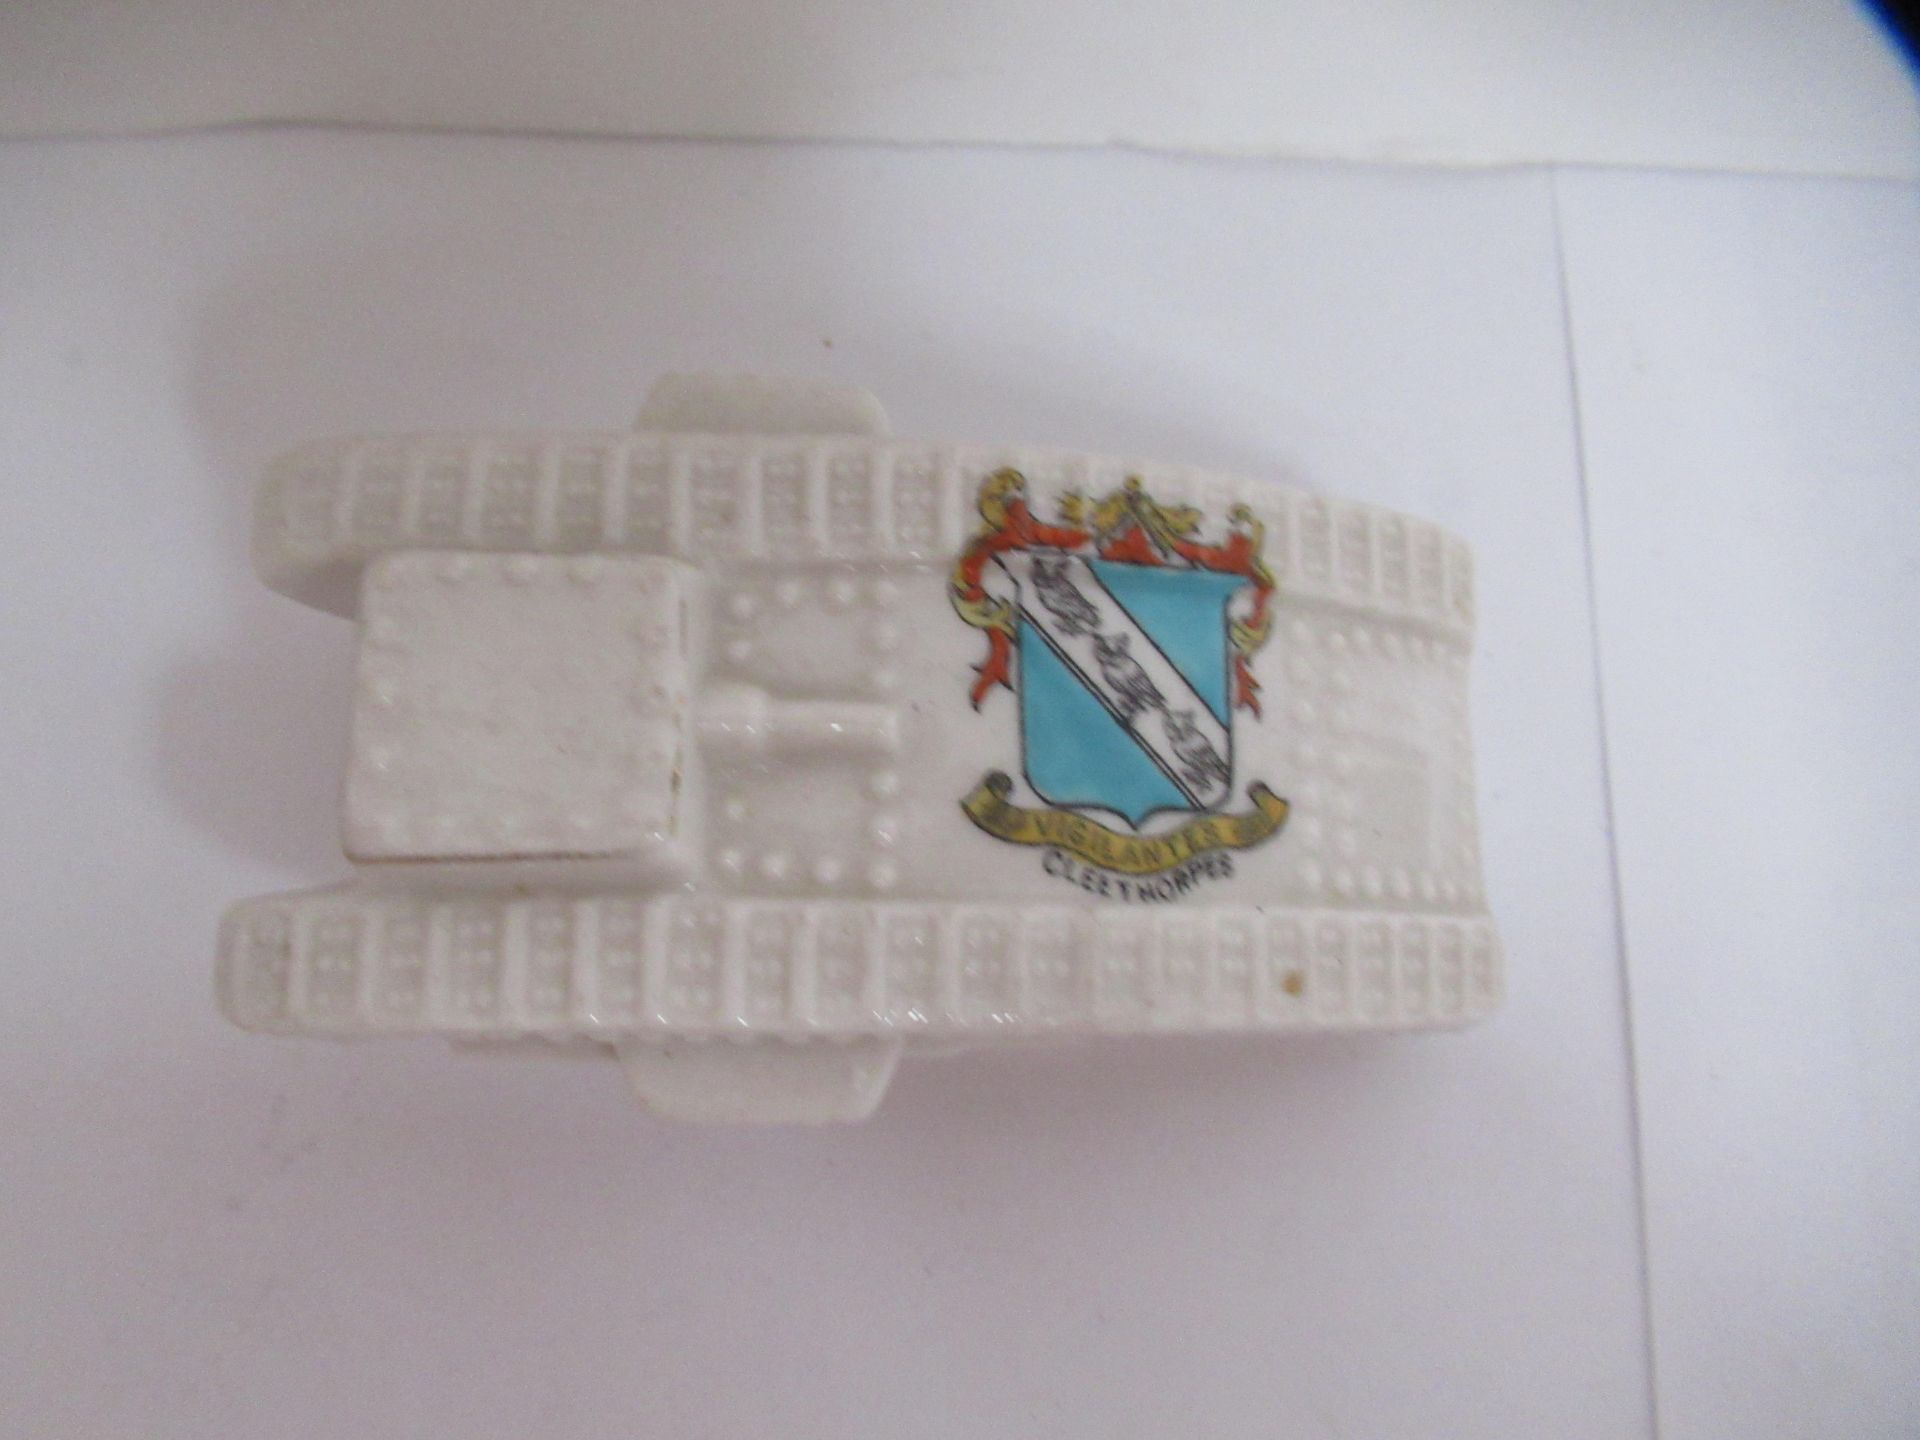 Crested China waterfall heraldic 'model of a British Tank' with Cleethorpes coat of arms - Image 2 of 9